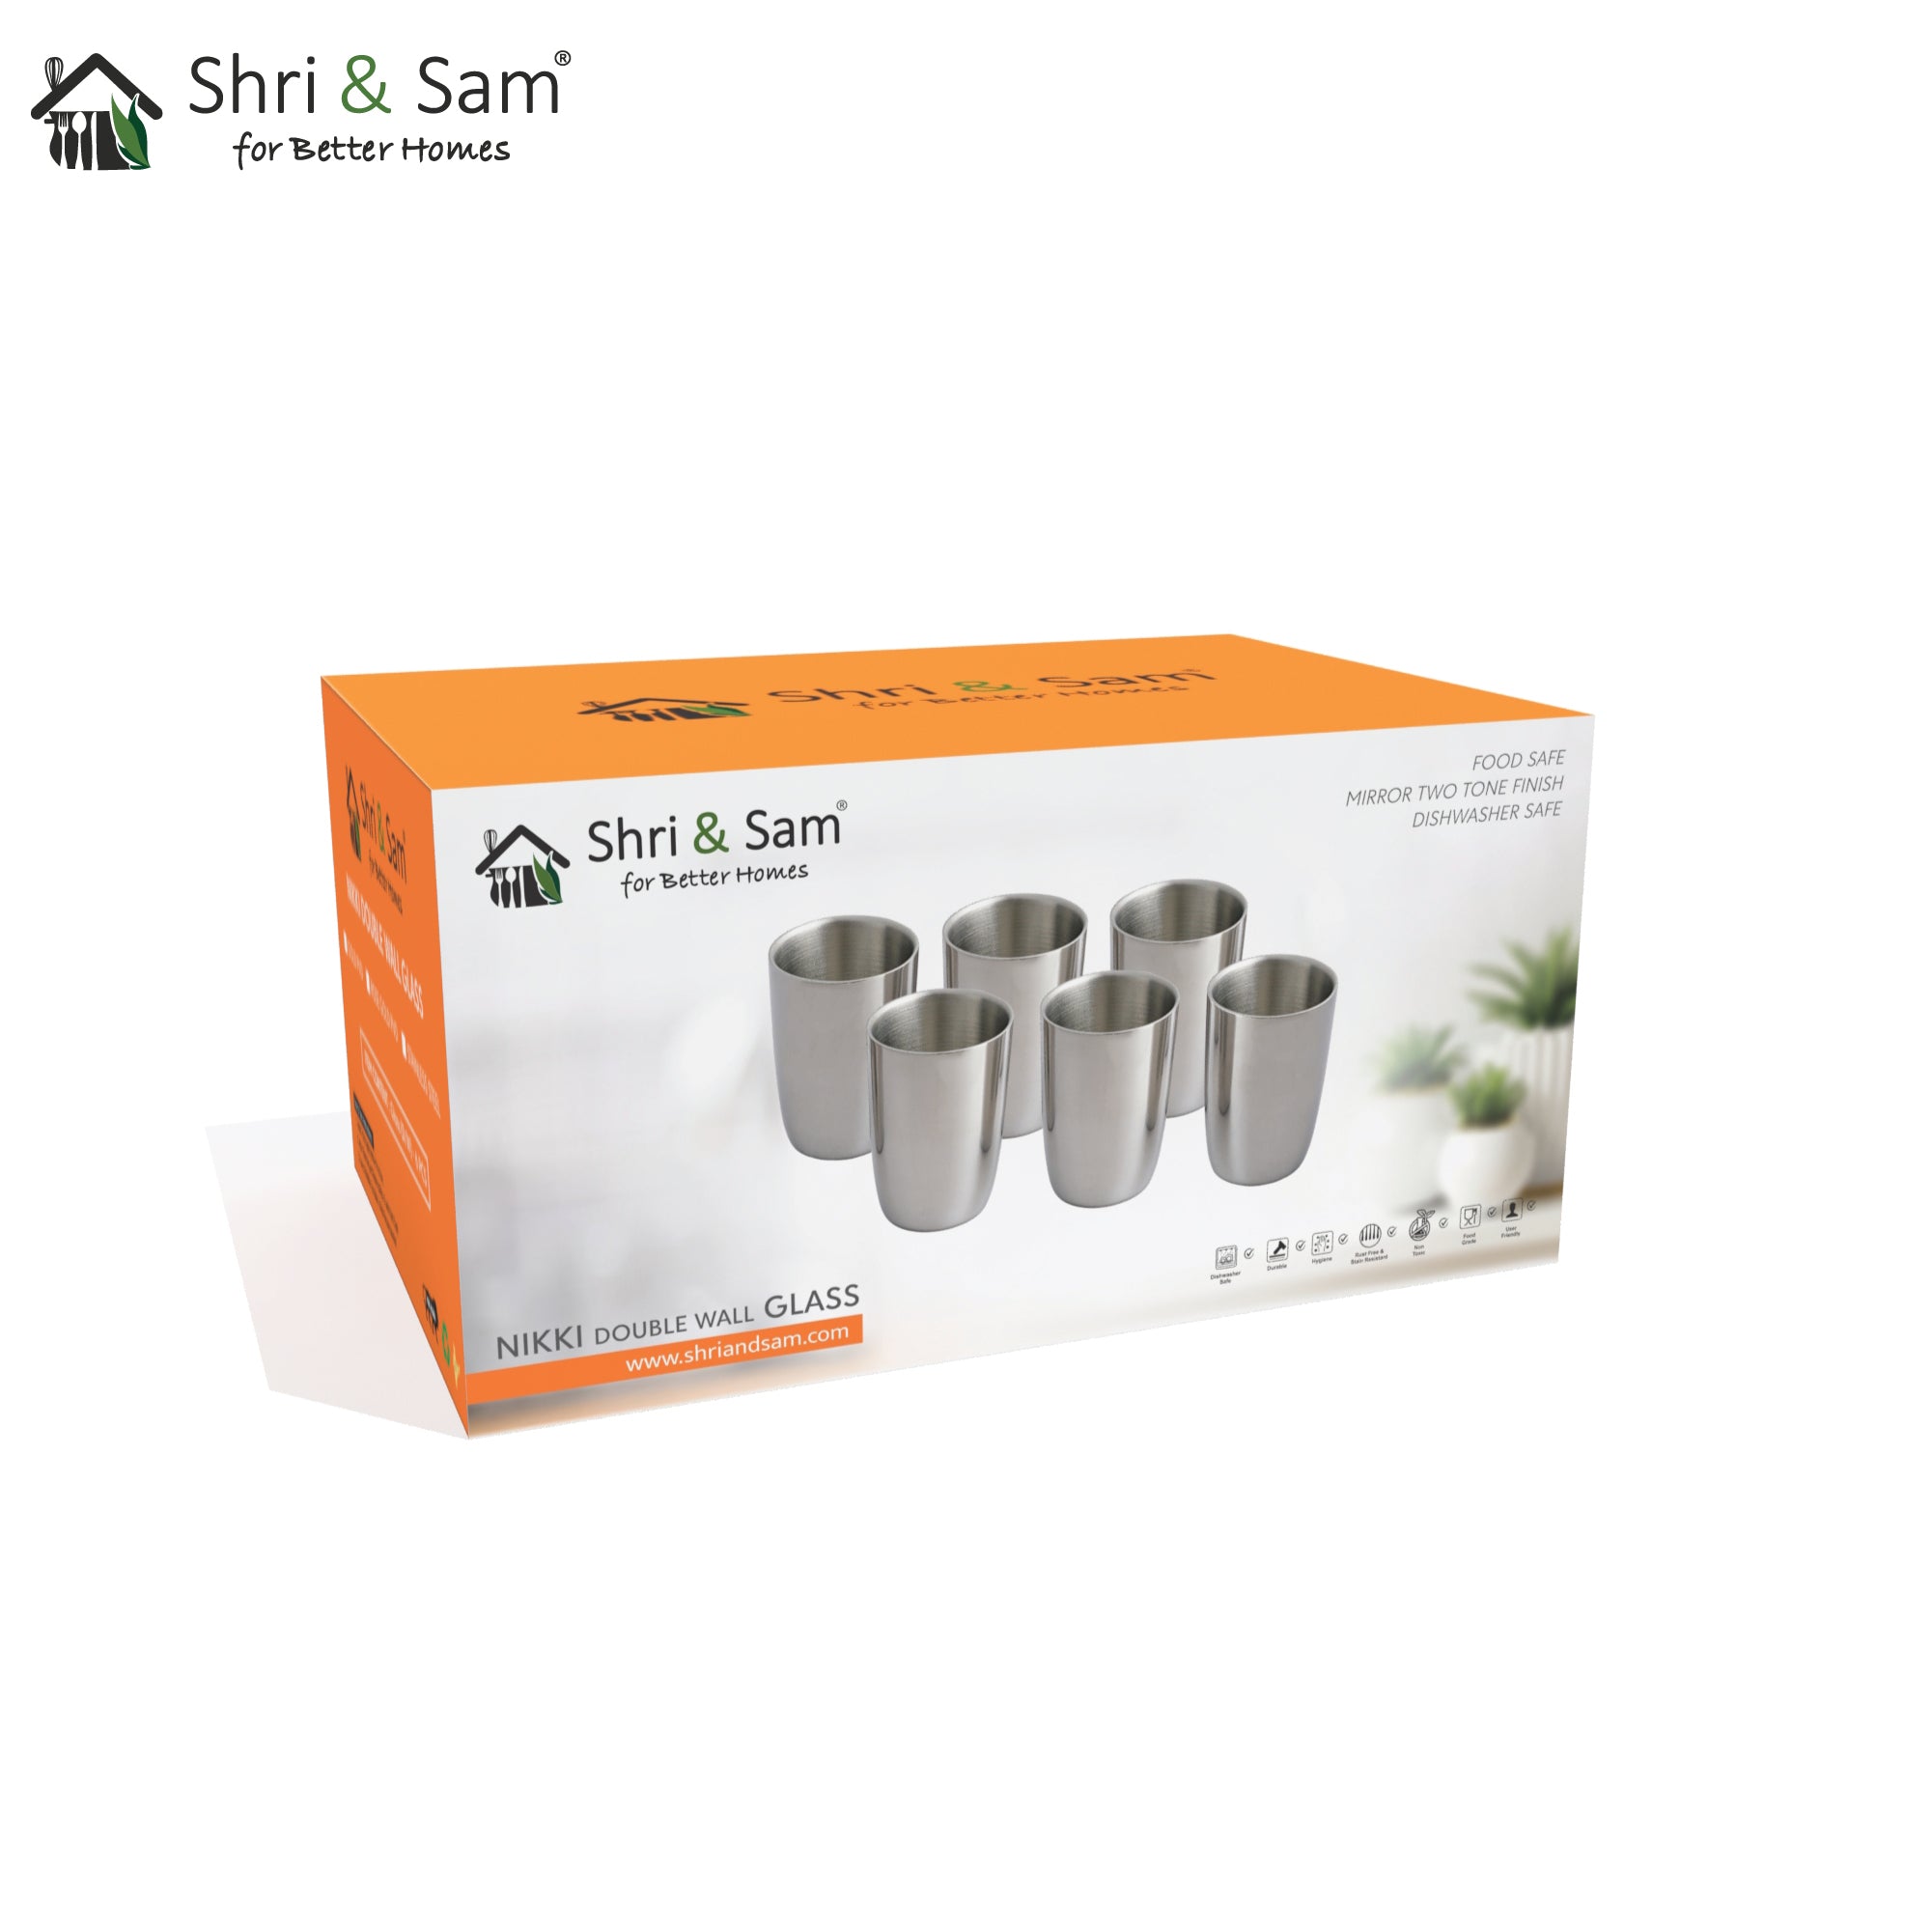 Stainless Steel 6 PCS Double Wall Glass Nikki